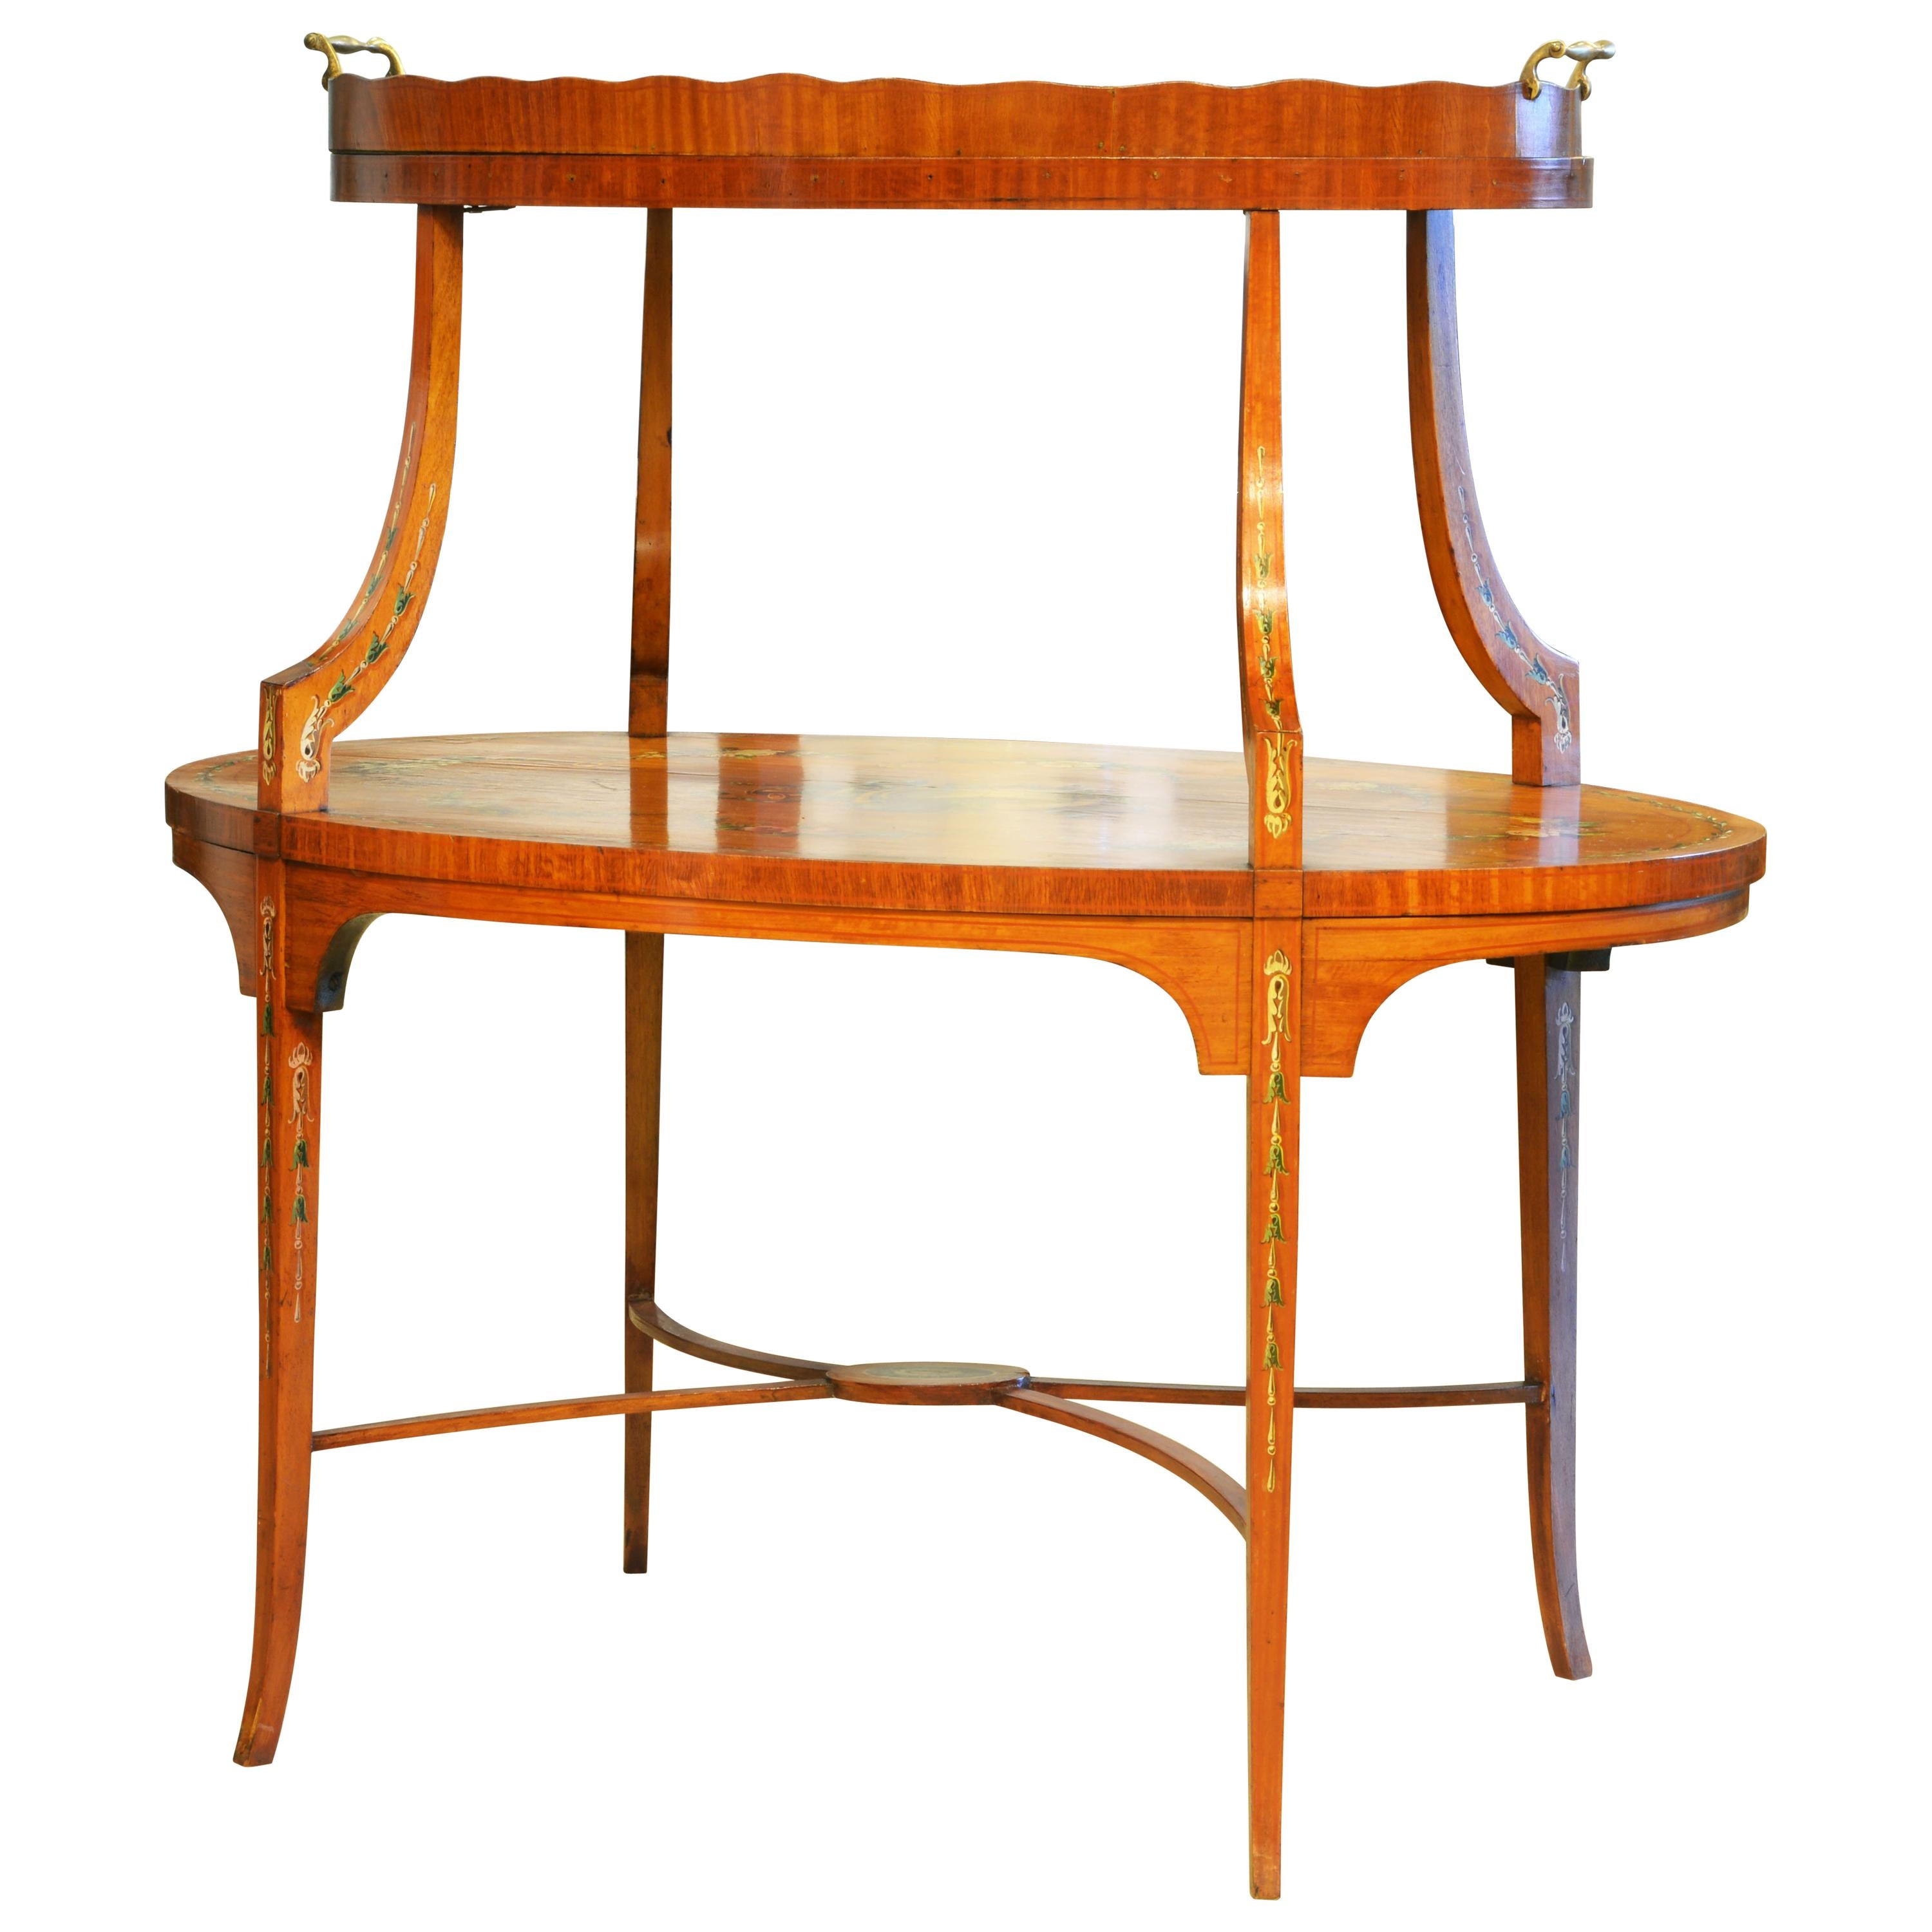 English Edwardian Two-Tier Decorated Satinwood Dessert Table with Lift Up Tray